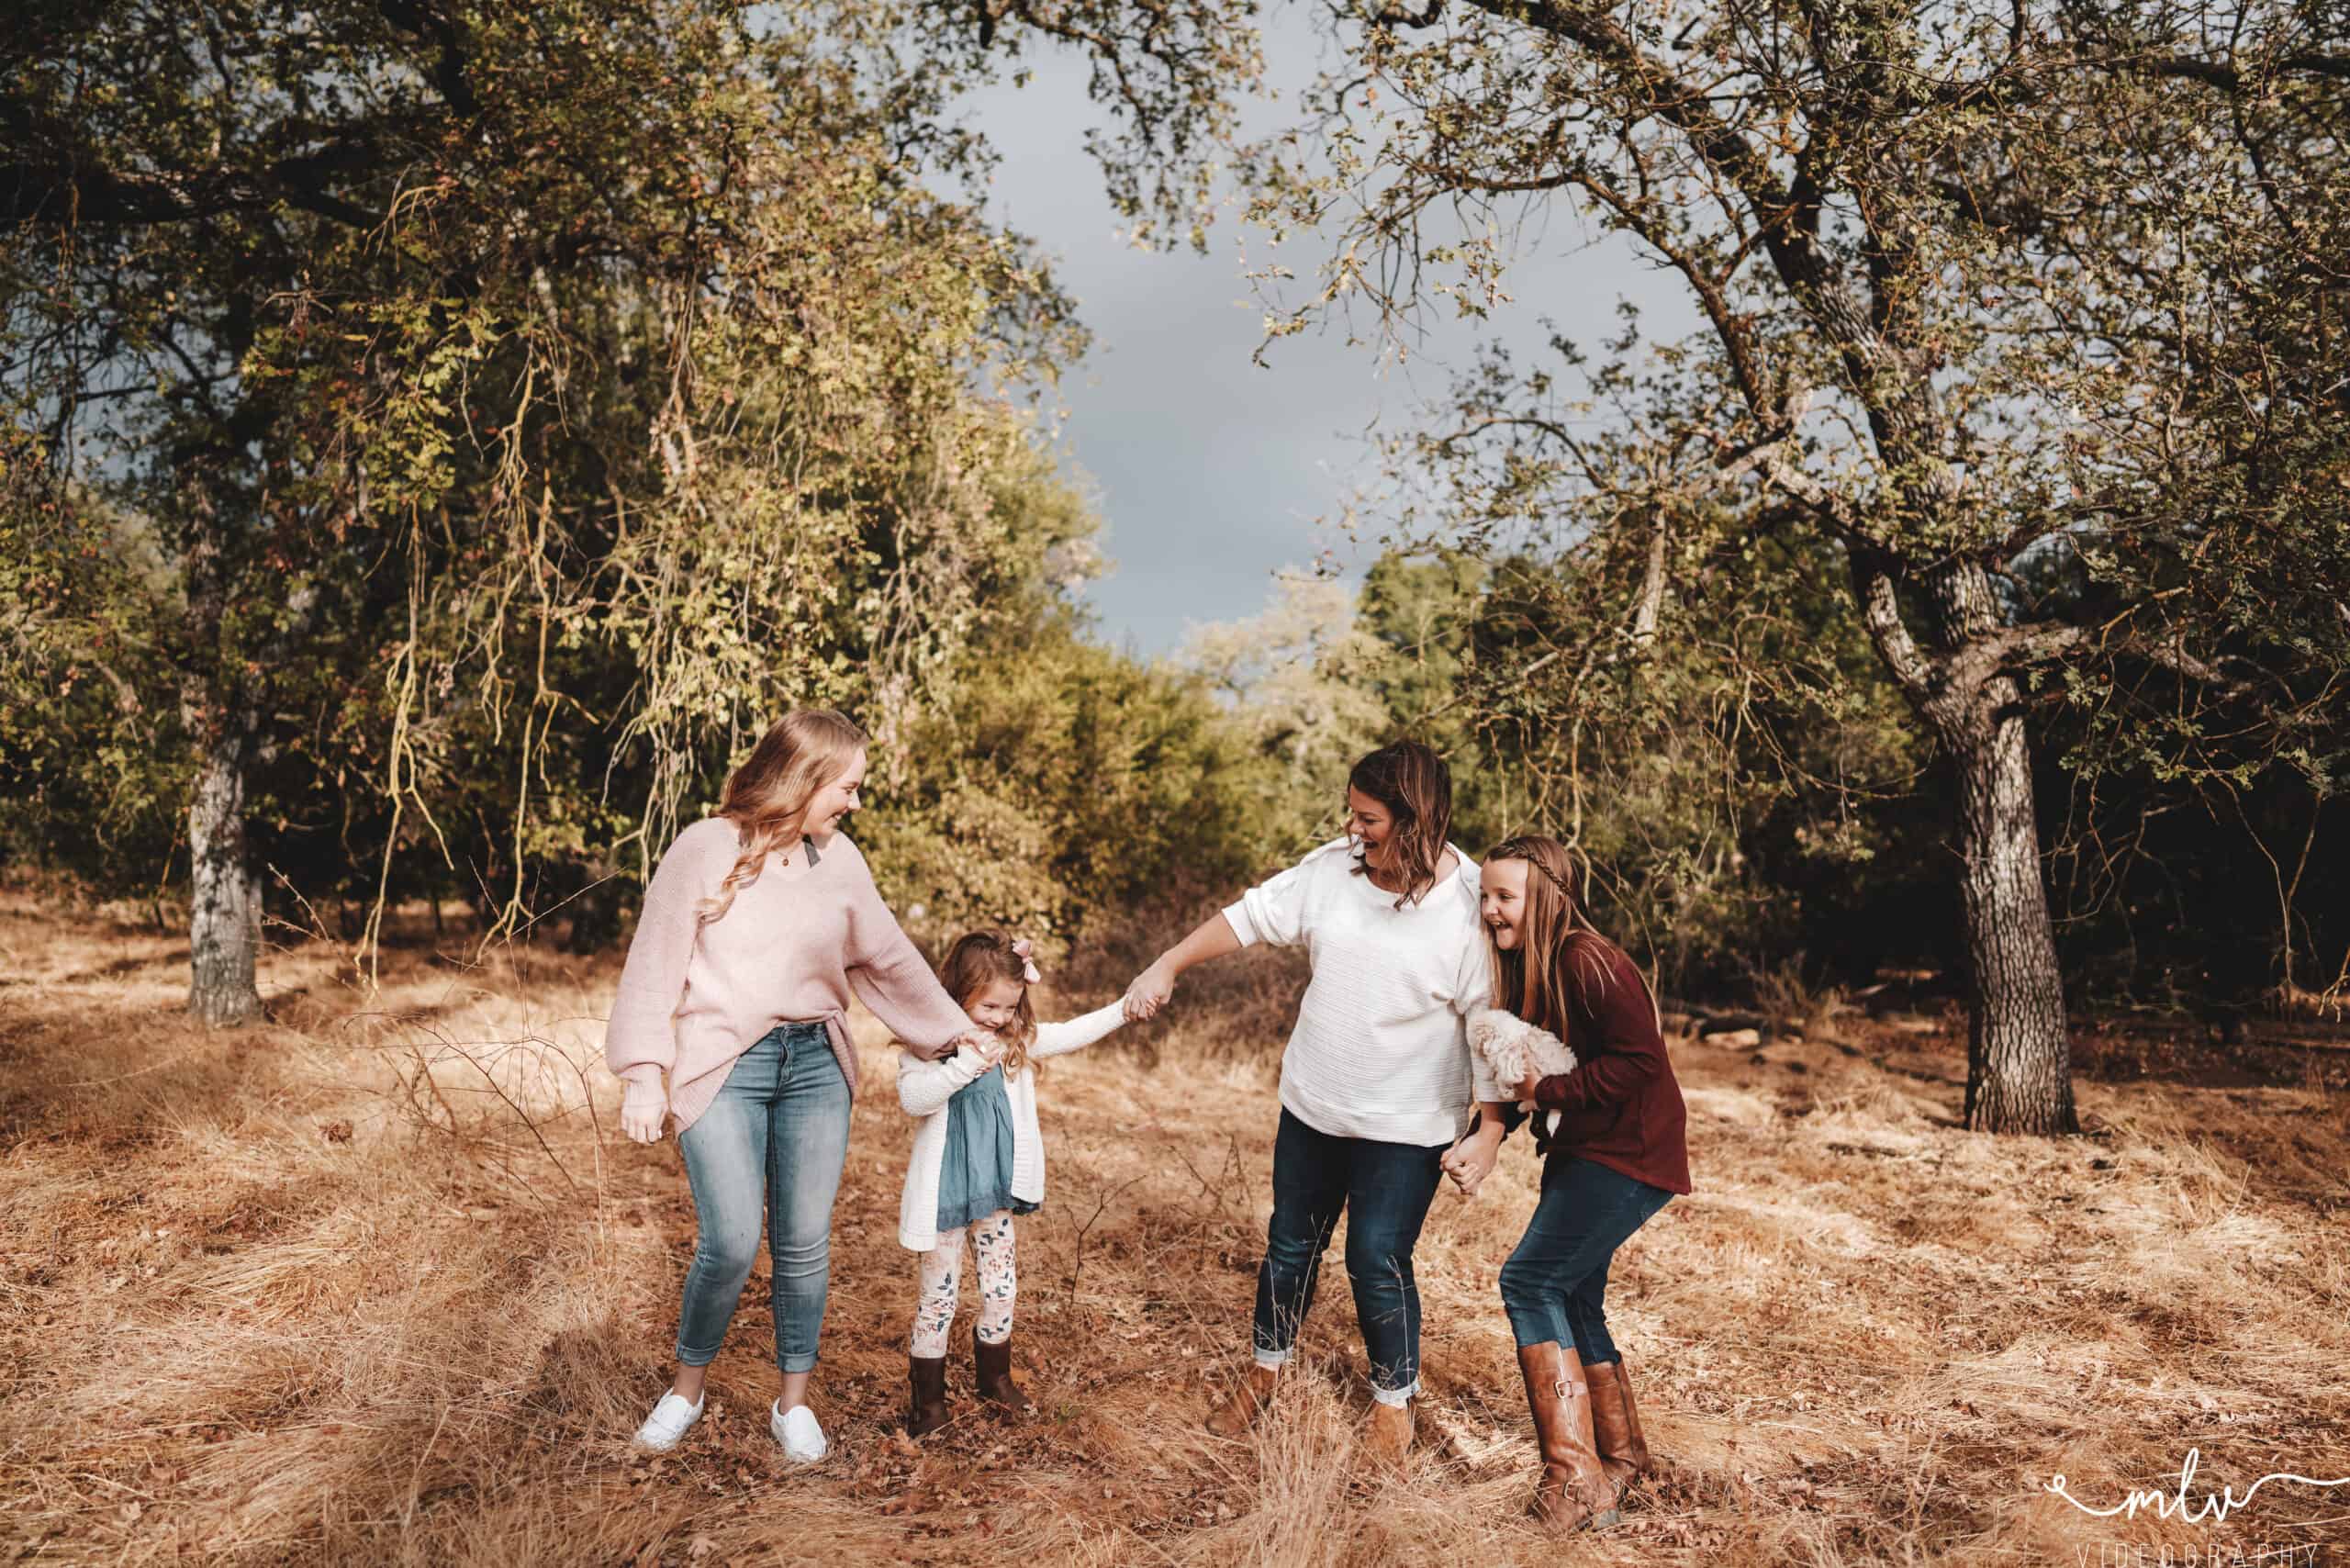 Family Photography at Guadalupe Oak Grove Trail in San Jose, California.